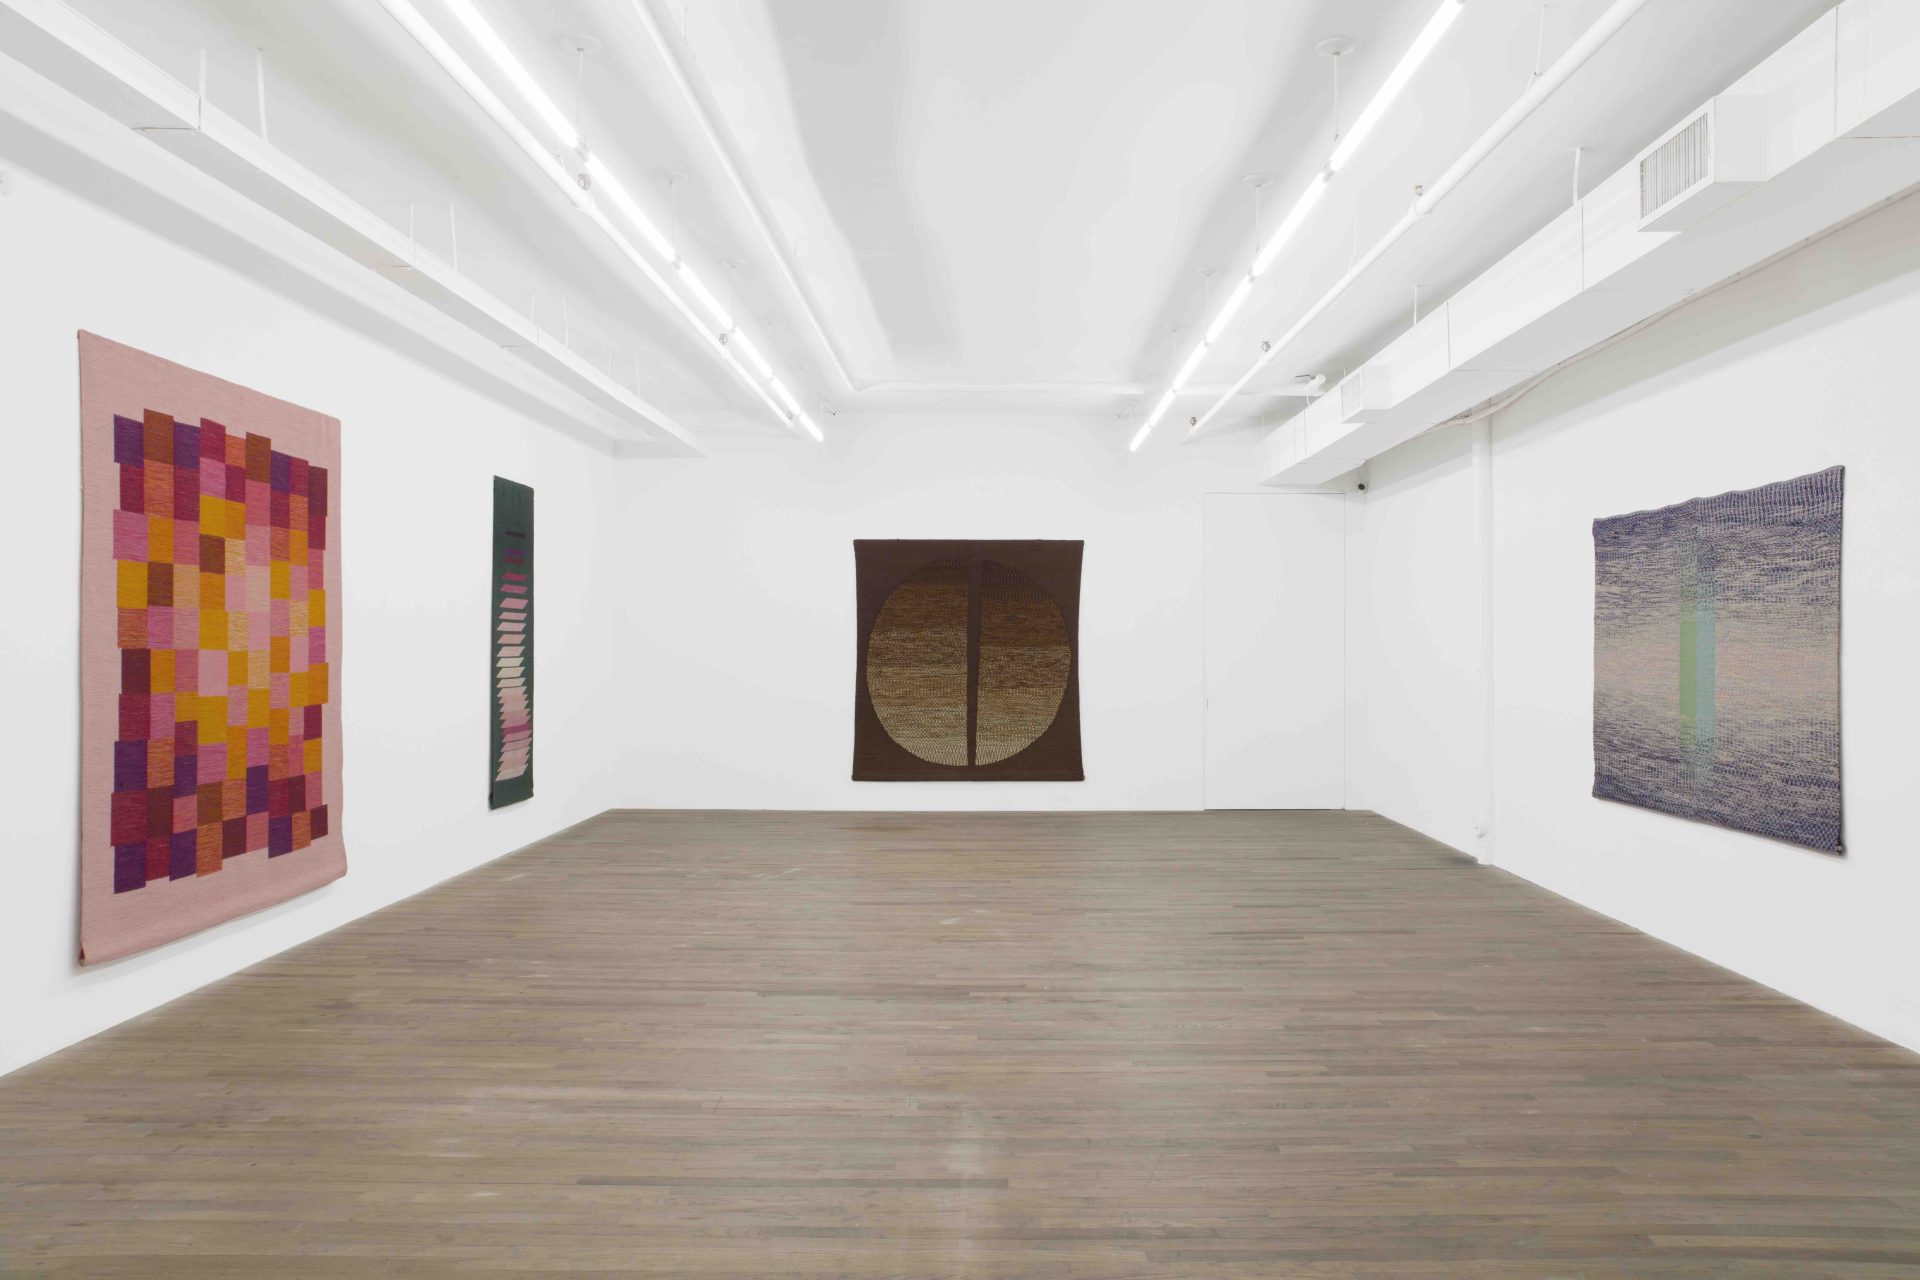 <I>Renata Bonfanti: The Art of Weaving
(selected works from 1968-2009)</i>, 2023
</br> installation view, kaufmann repetto, New York